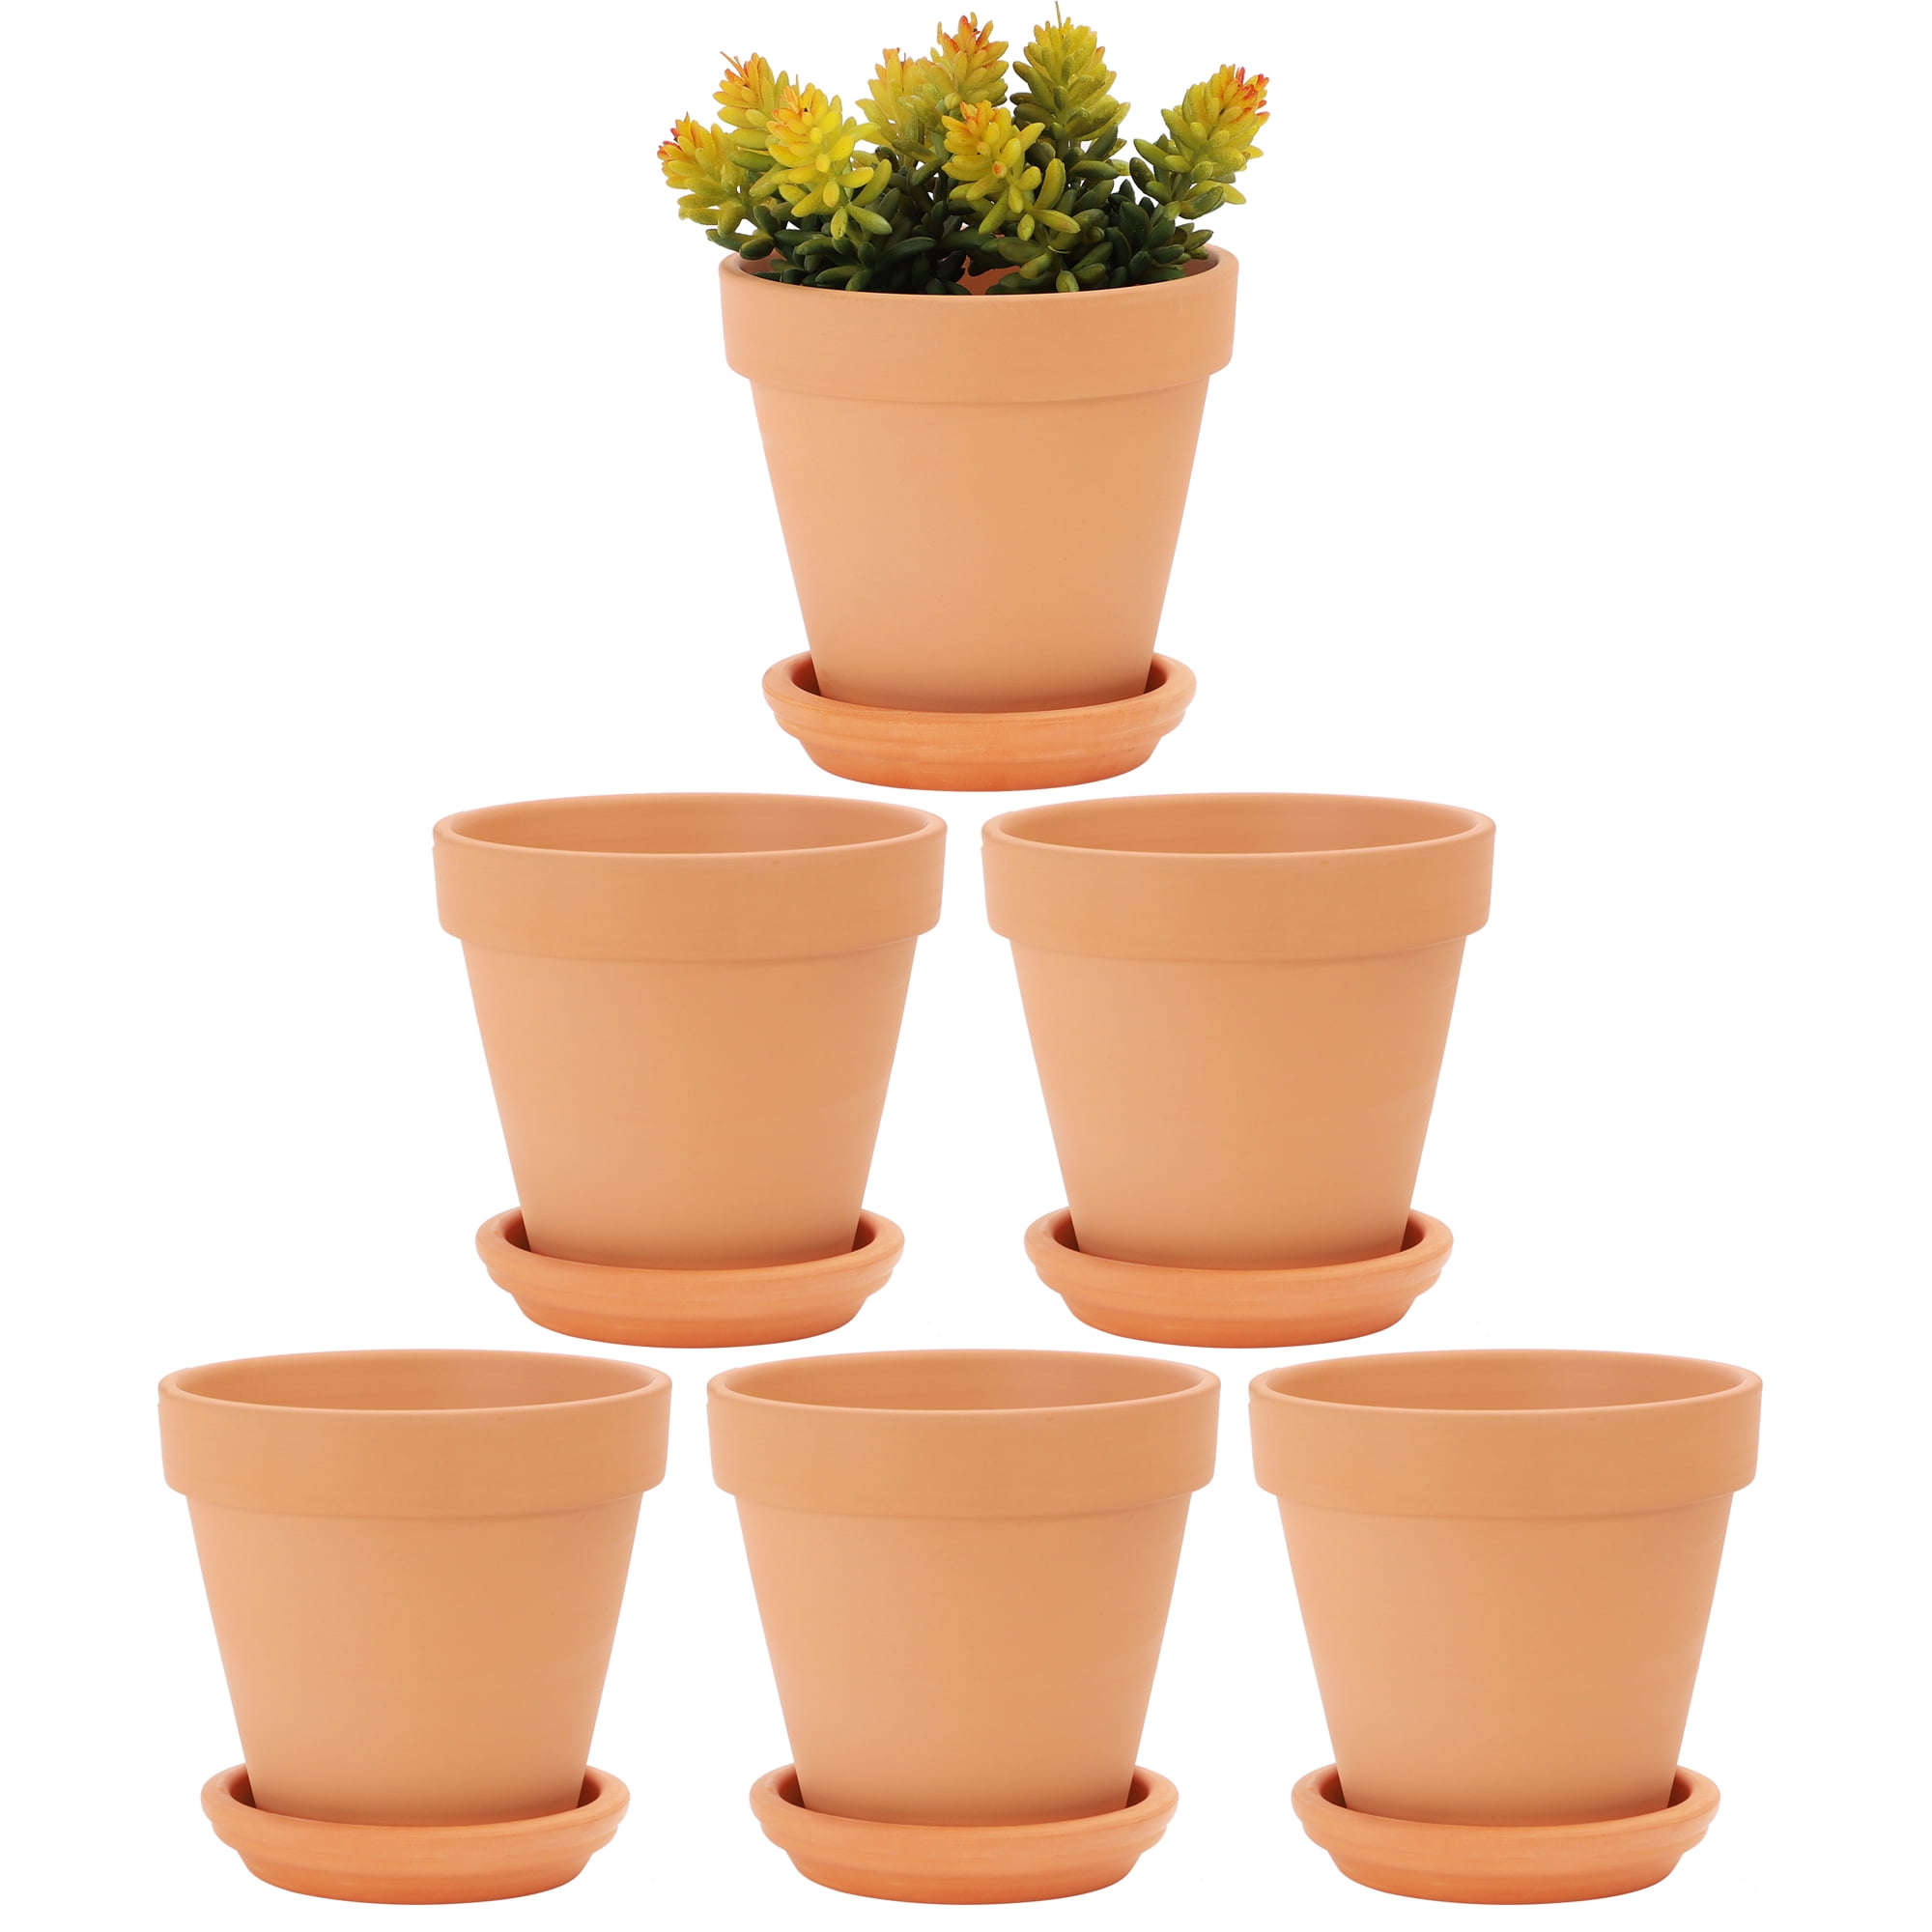 Happiness Size 4 5 and 6 3 Pack Ceramic Flower Plant Pot with Saucers 